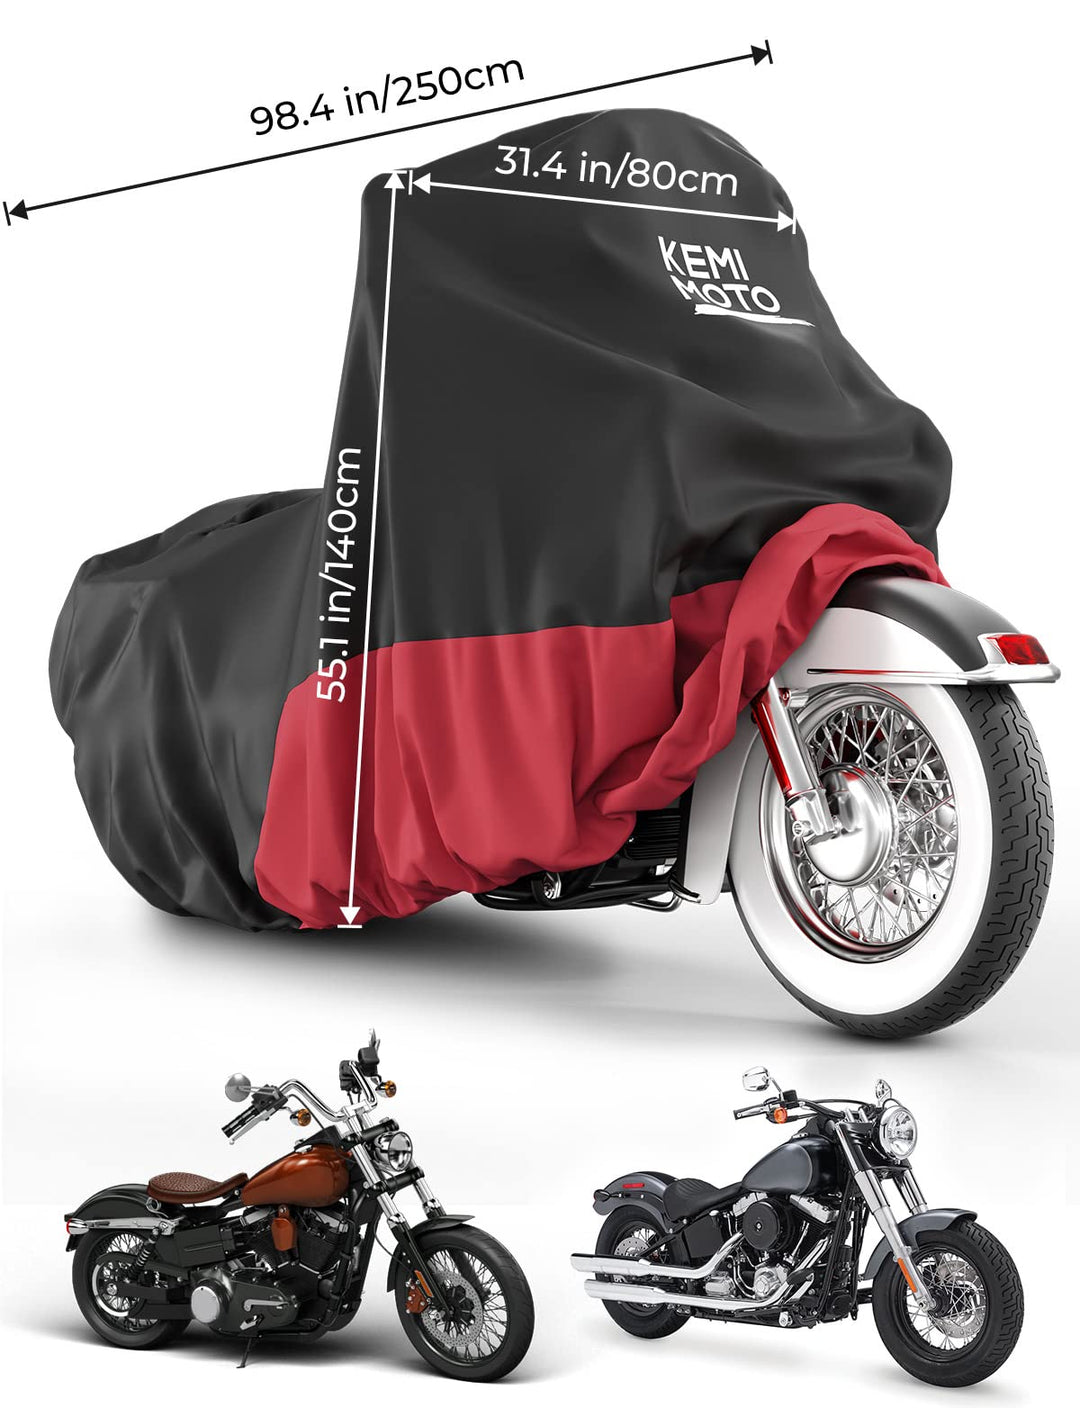 Get More Out of Your Motorcycle With Kemimoto Accessories